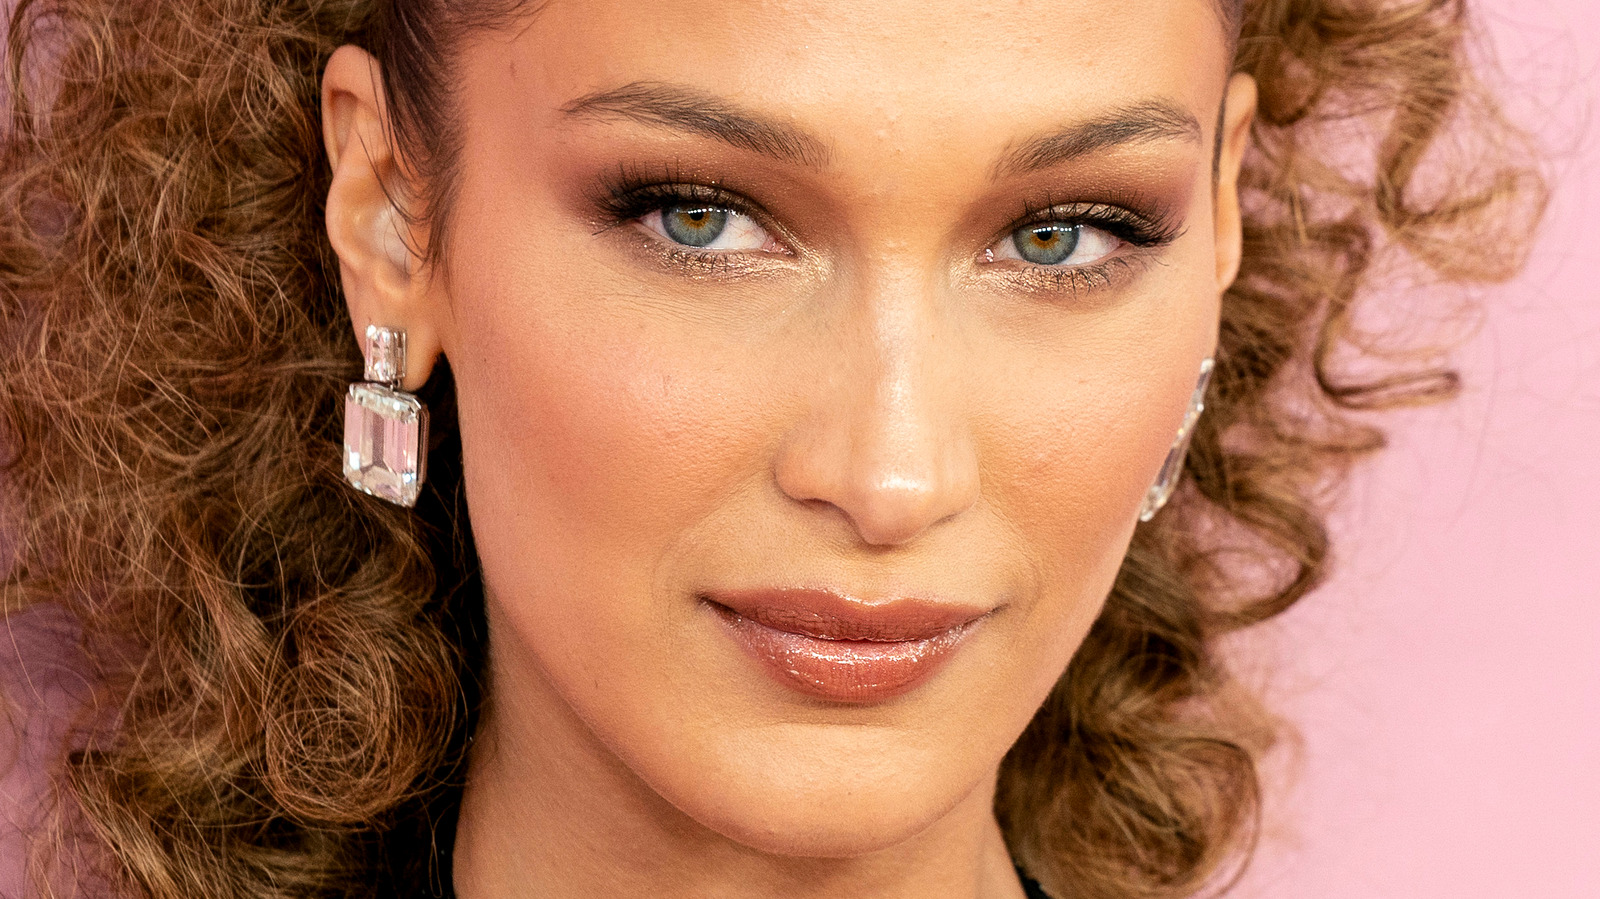 Bella Hadid Reaffirms Our Preconceptions About Her Plastic Surgery